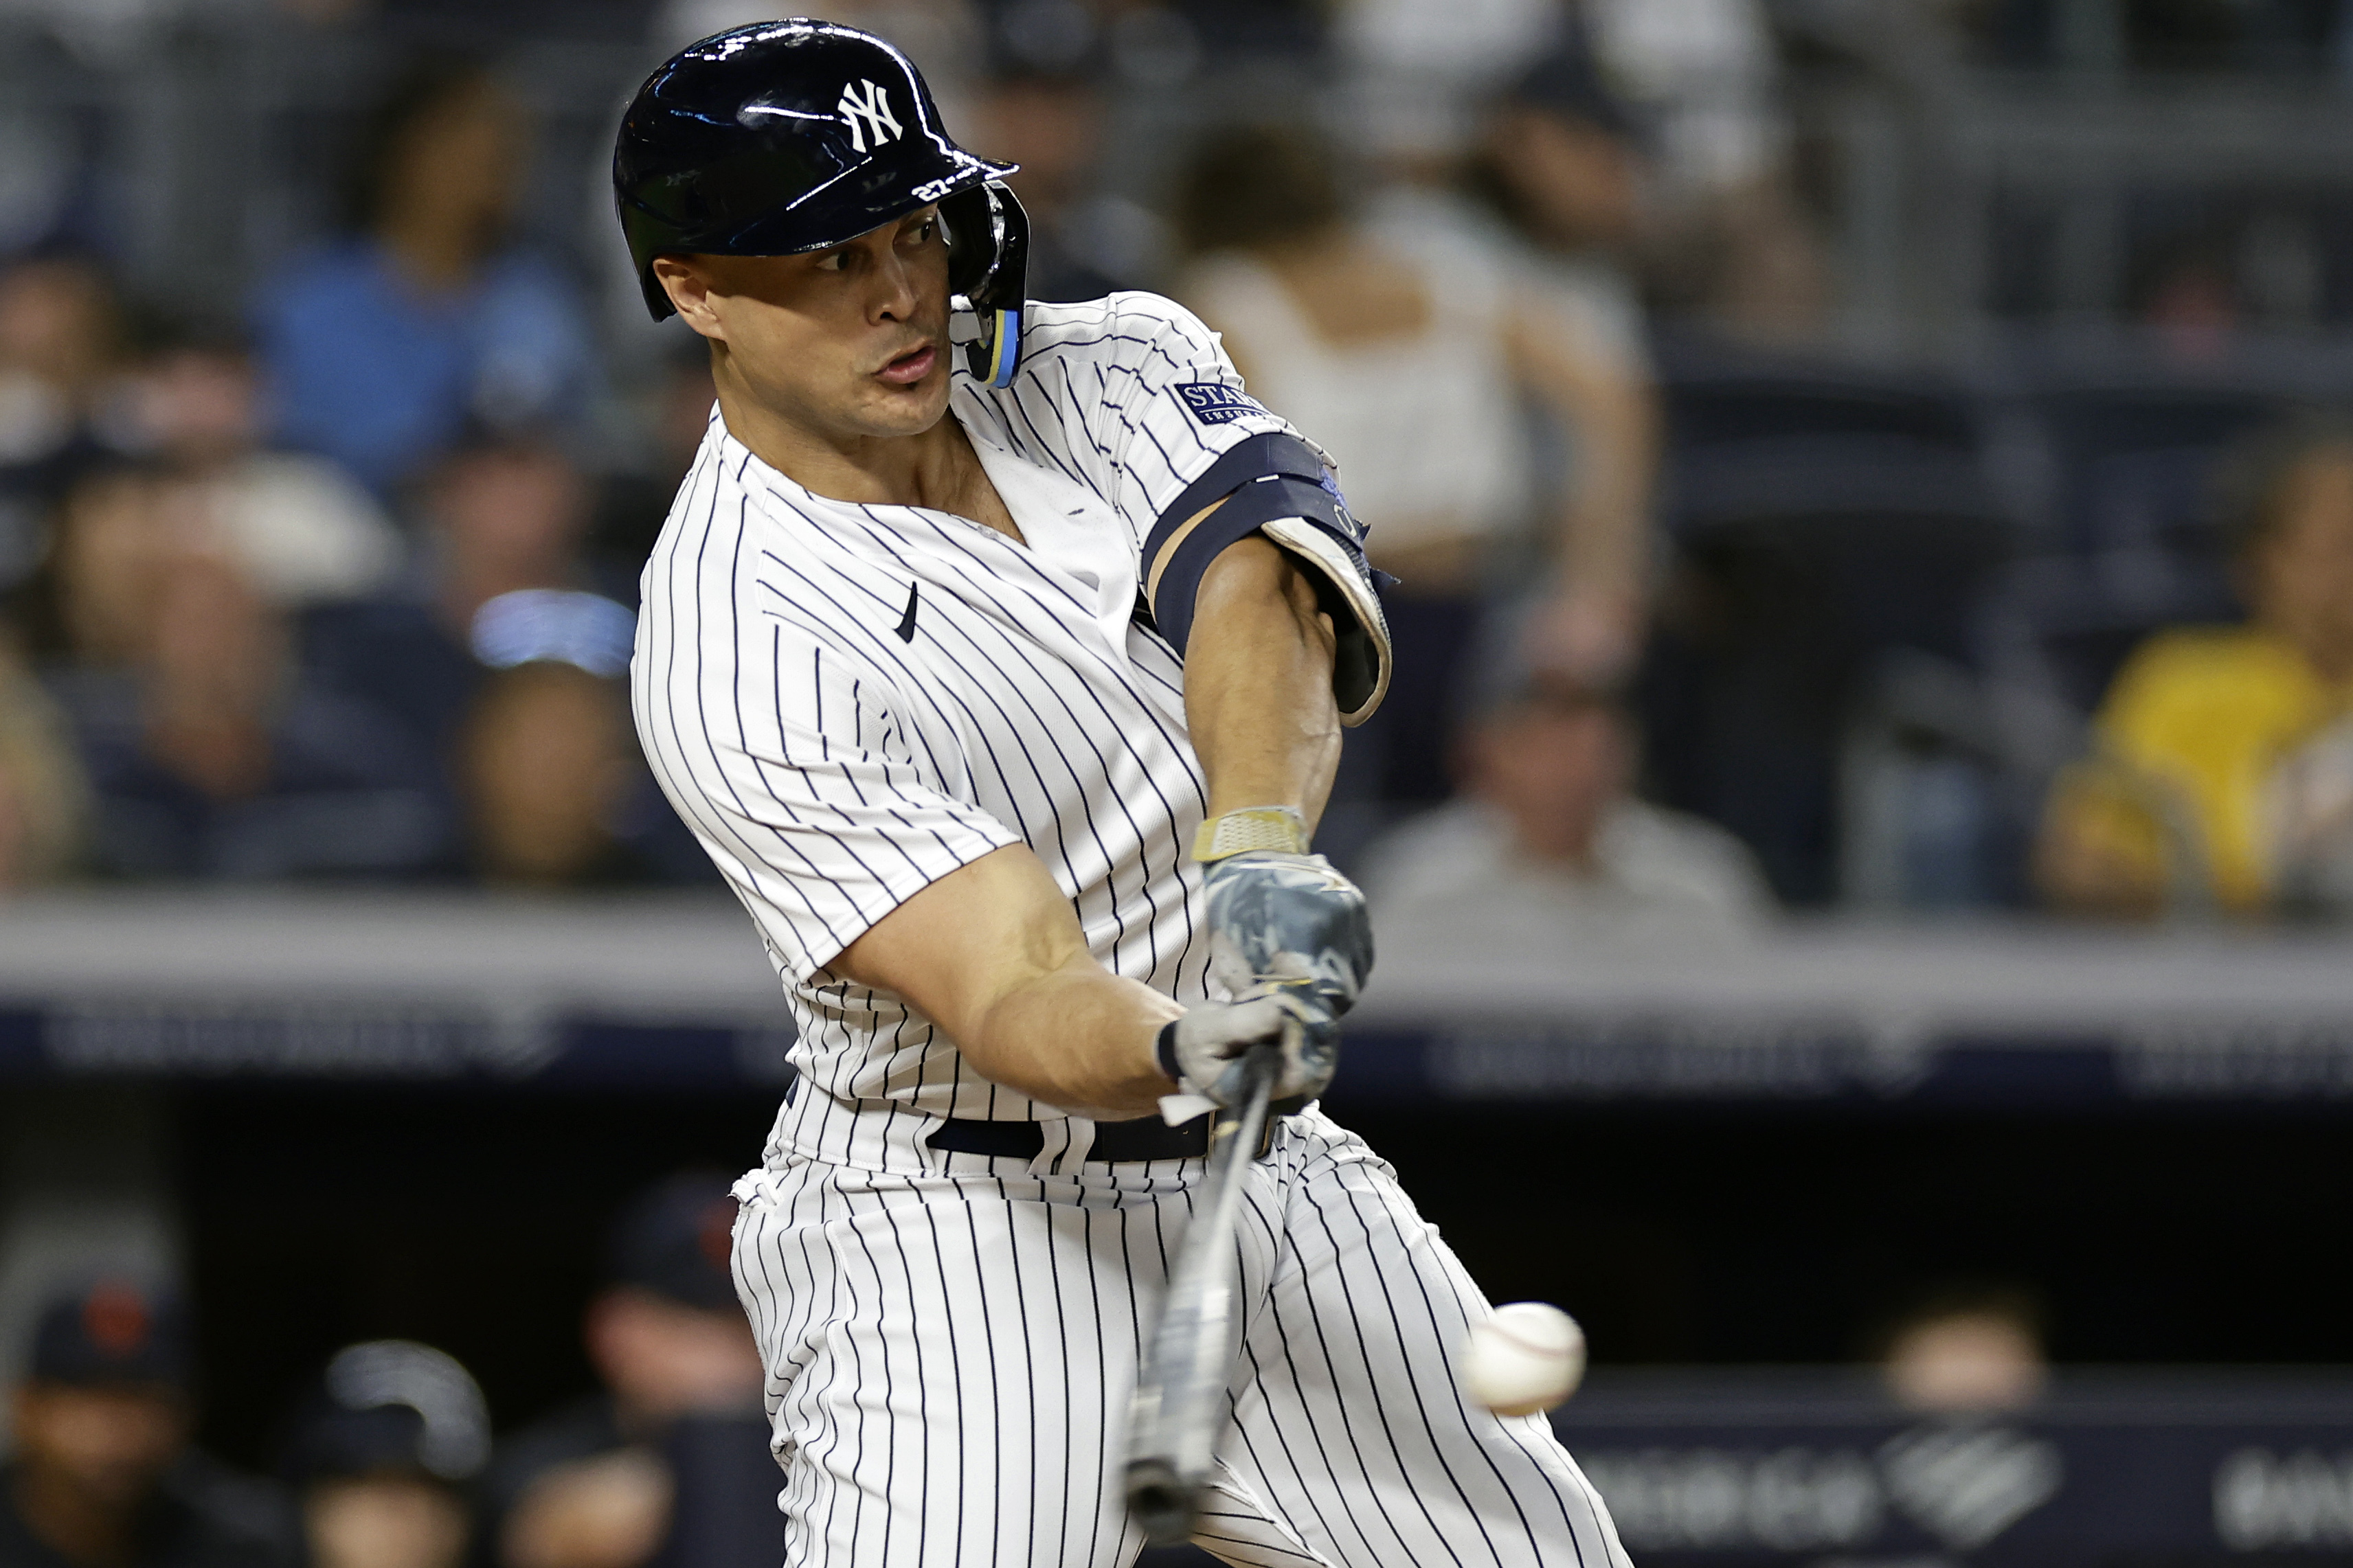 Jasson Dominguez homers again as Yankees get 5th straight victory